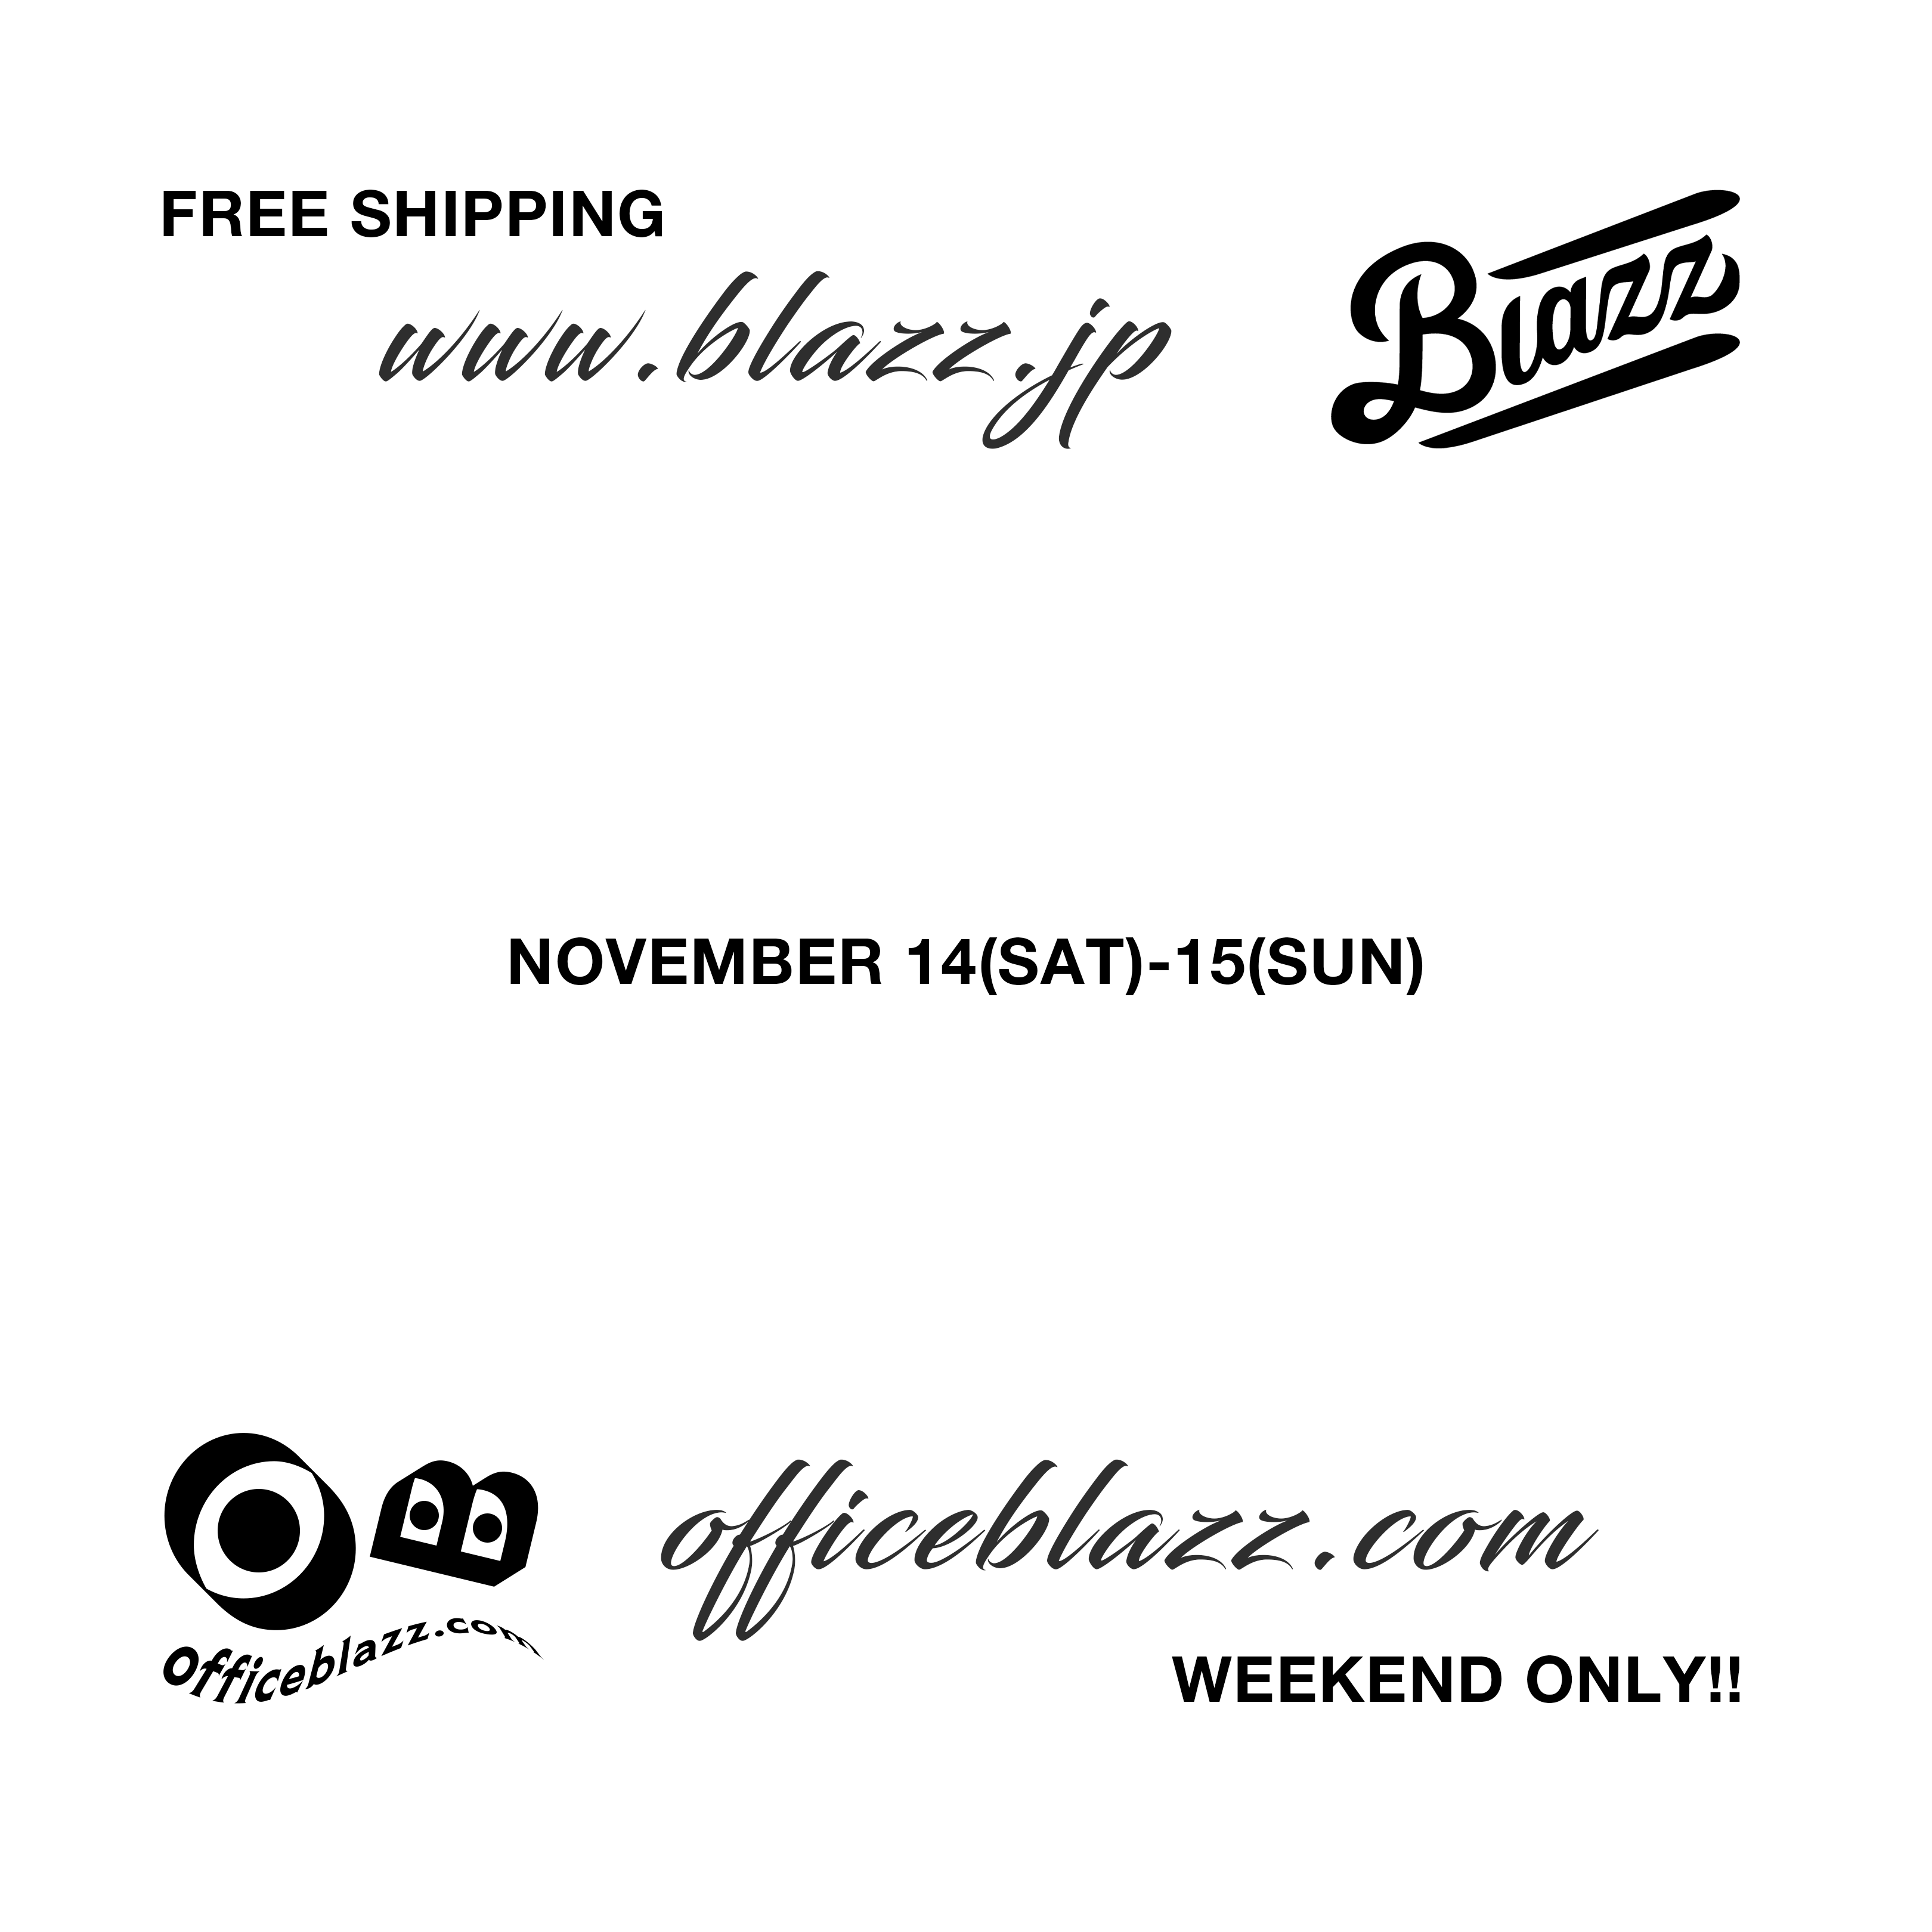 WEEKEND ONLY FREESHIPPING PROMOTION NOW!!